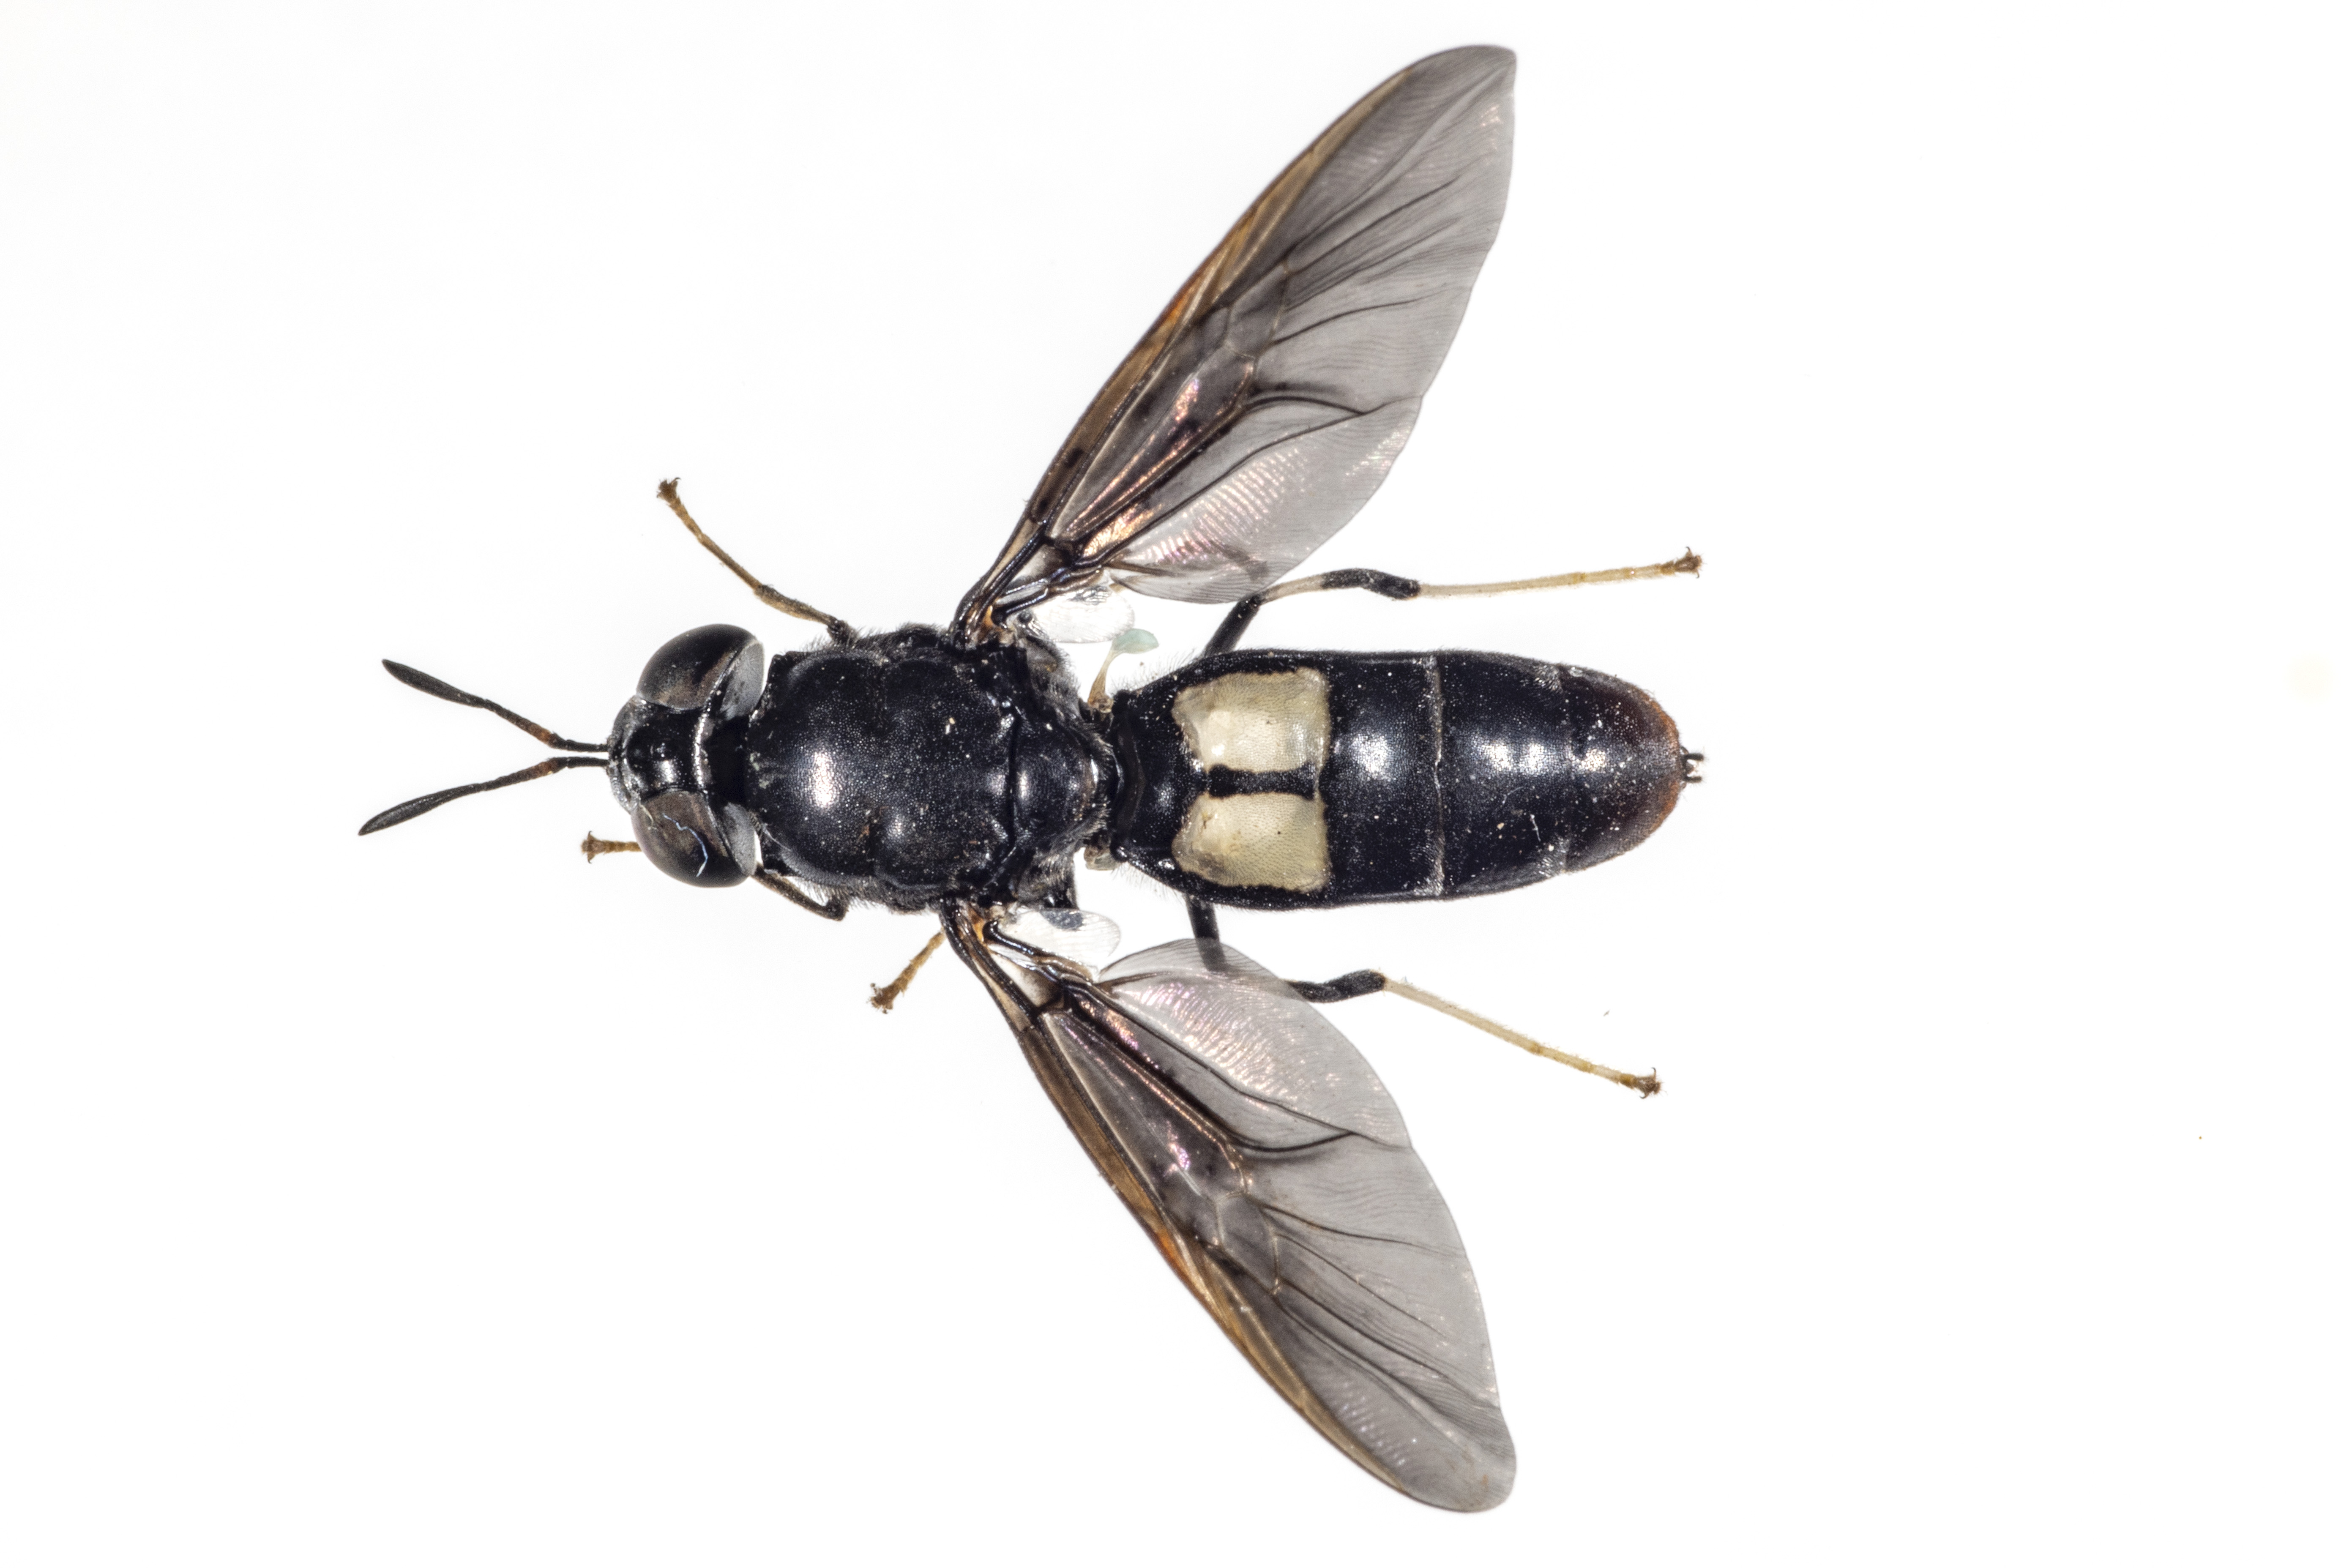 Figure 1. Adult black soldier fly mimics a wasp with the clear
cells on their abdomen. (<em>Photo credit: John Obermeyer, Purdue Entomology</em>)